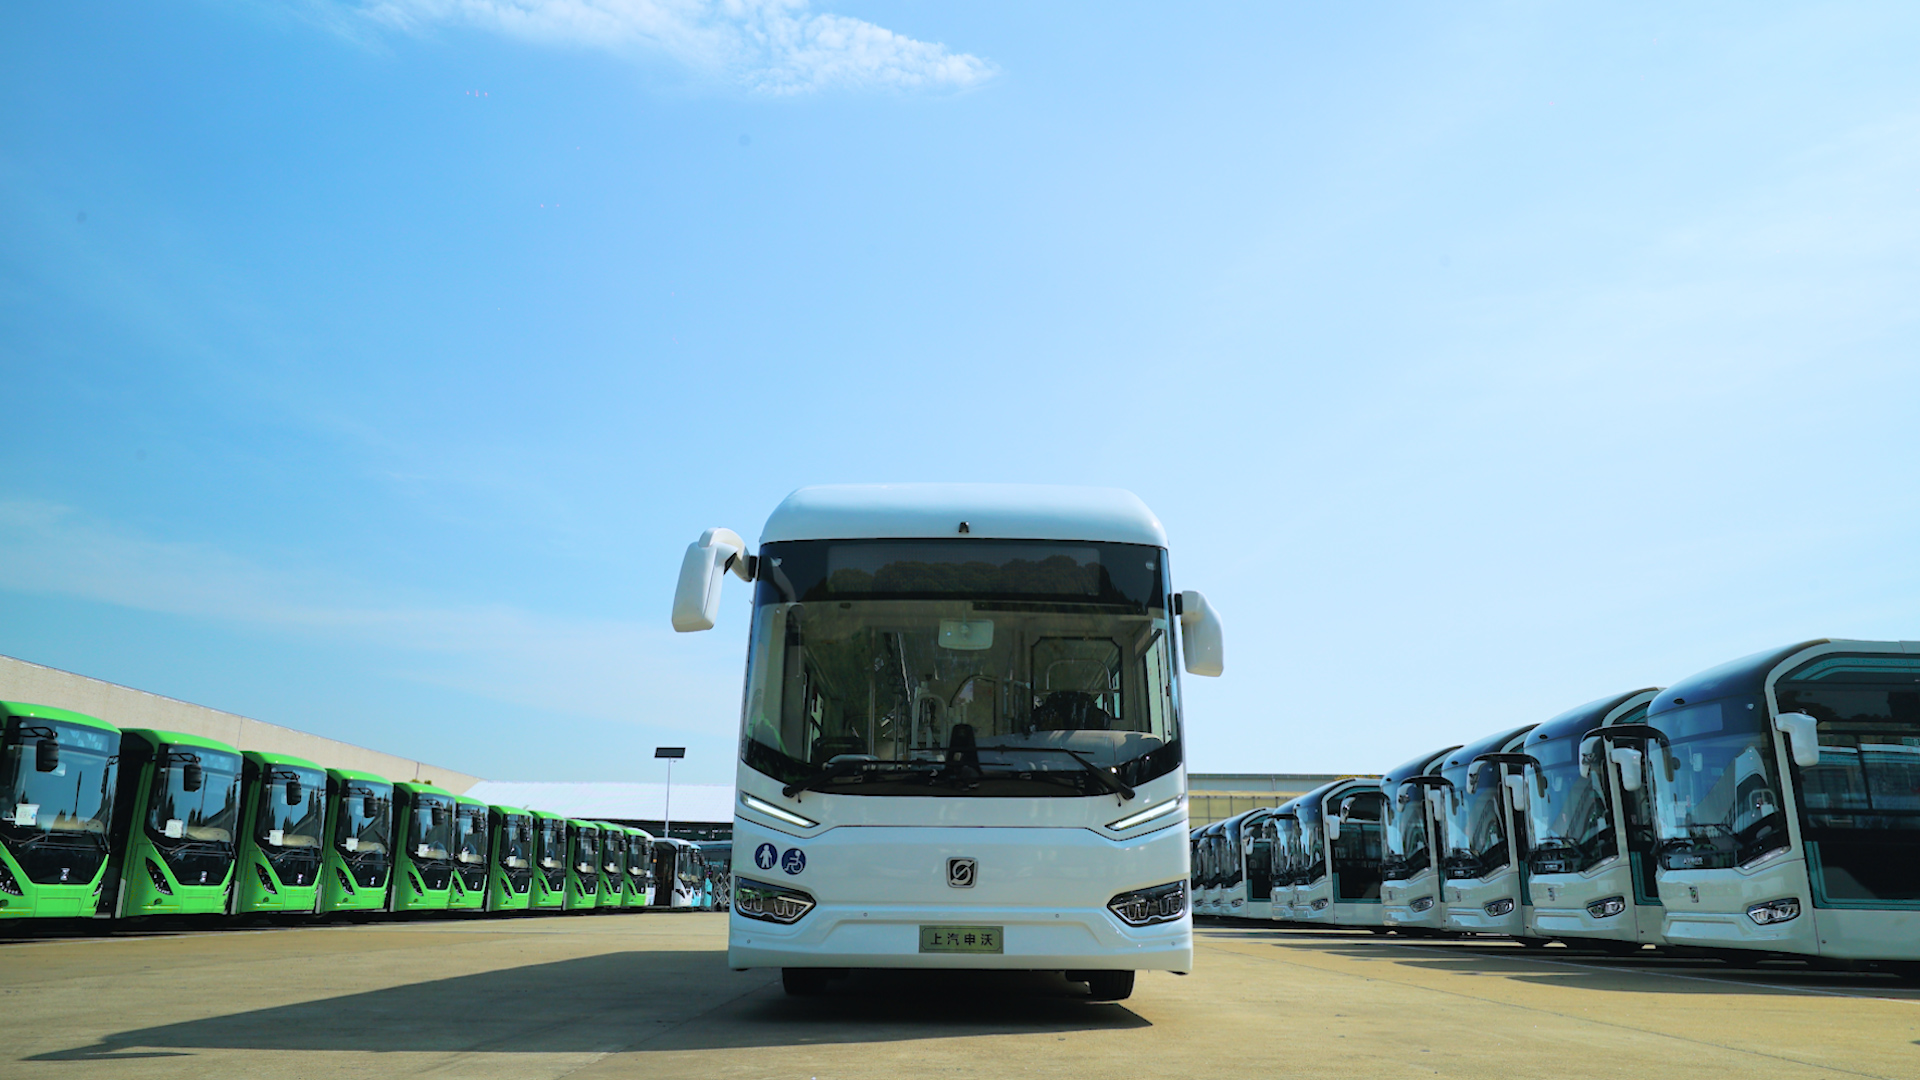 Shanghai Sunwin Bus presents its brand-new healthcare bus, ready to roll out across operations to help minimize the spread of coronavirus.